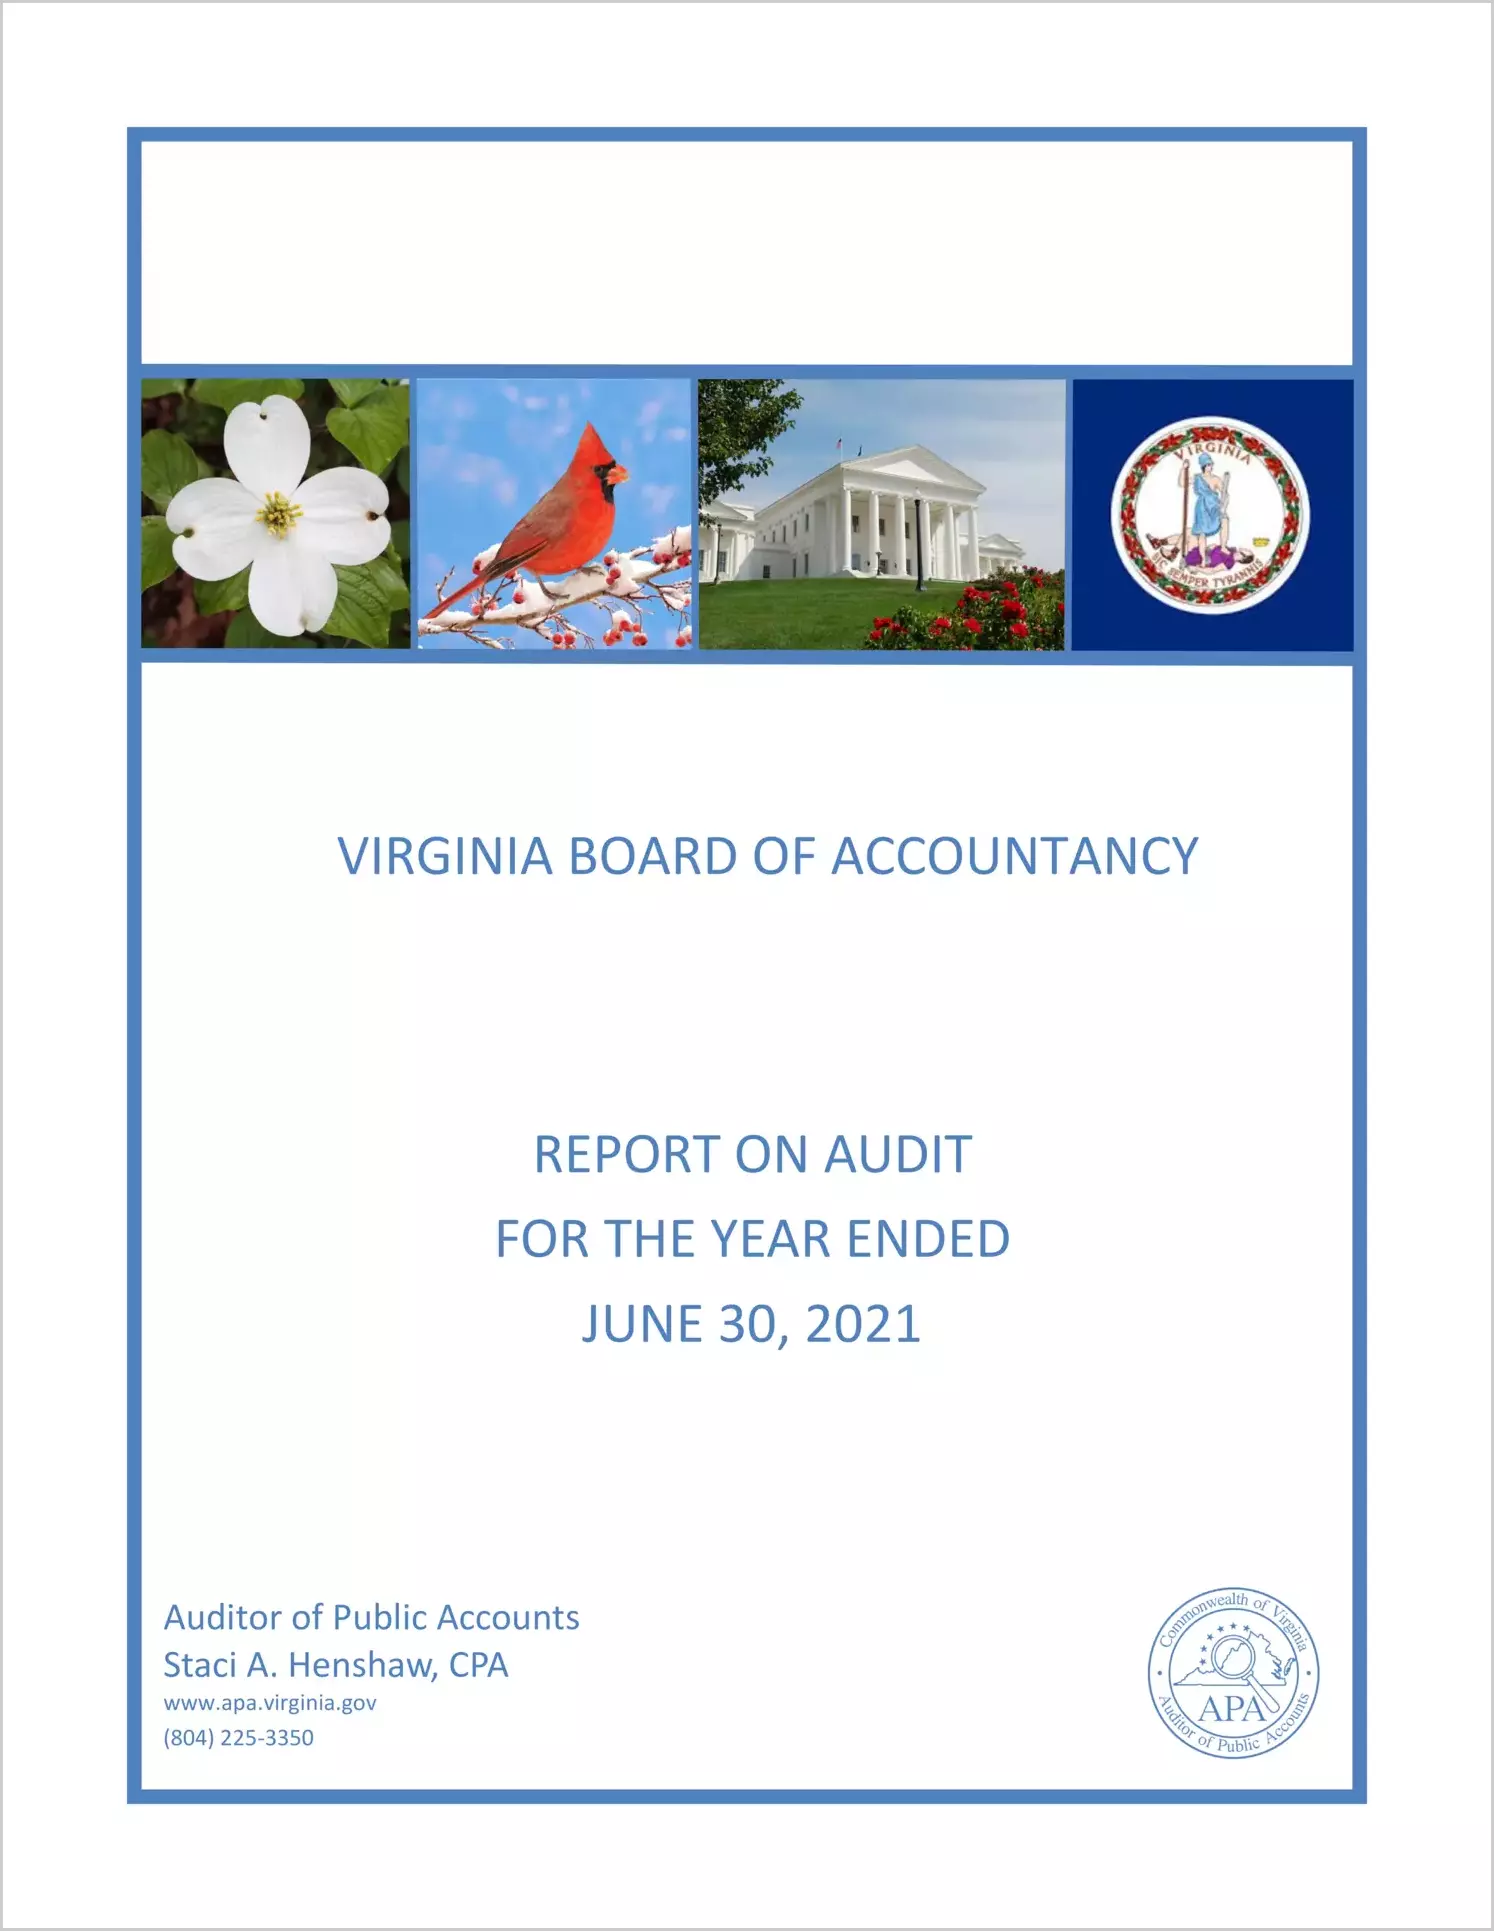 Virginia Board of Accountancy for the year ended June 30, 2021